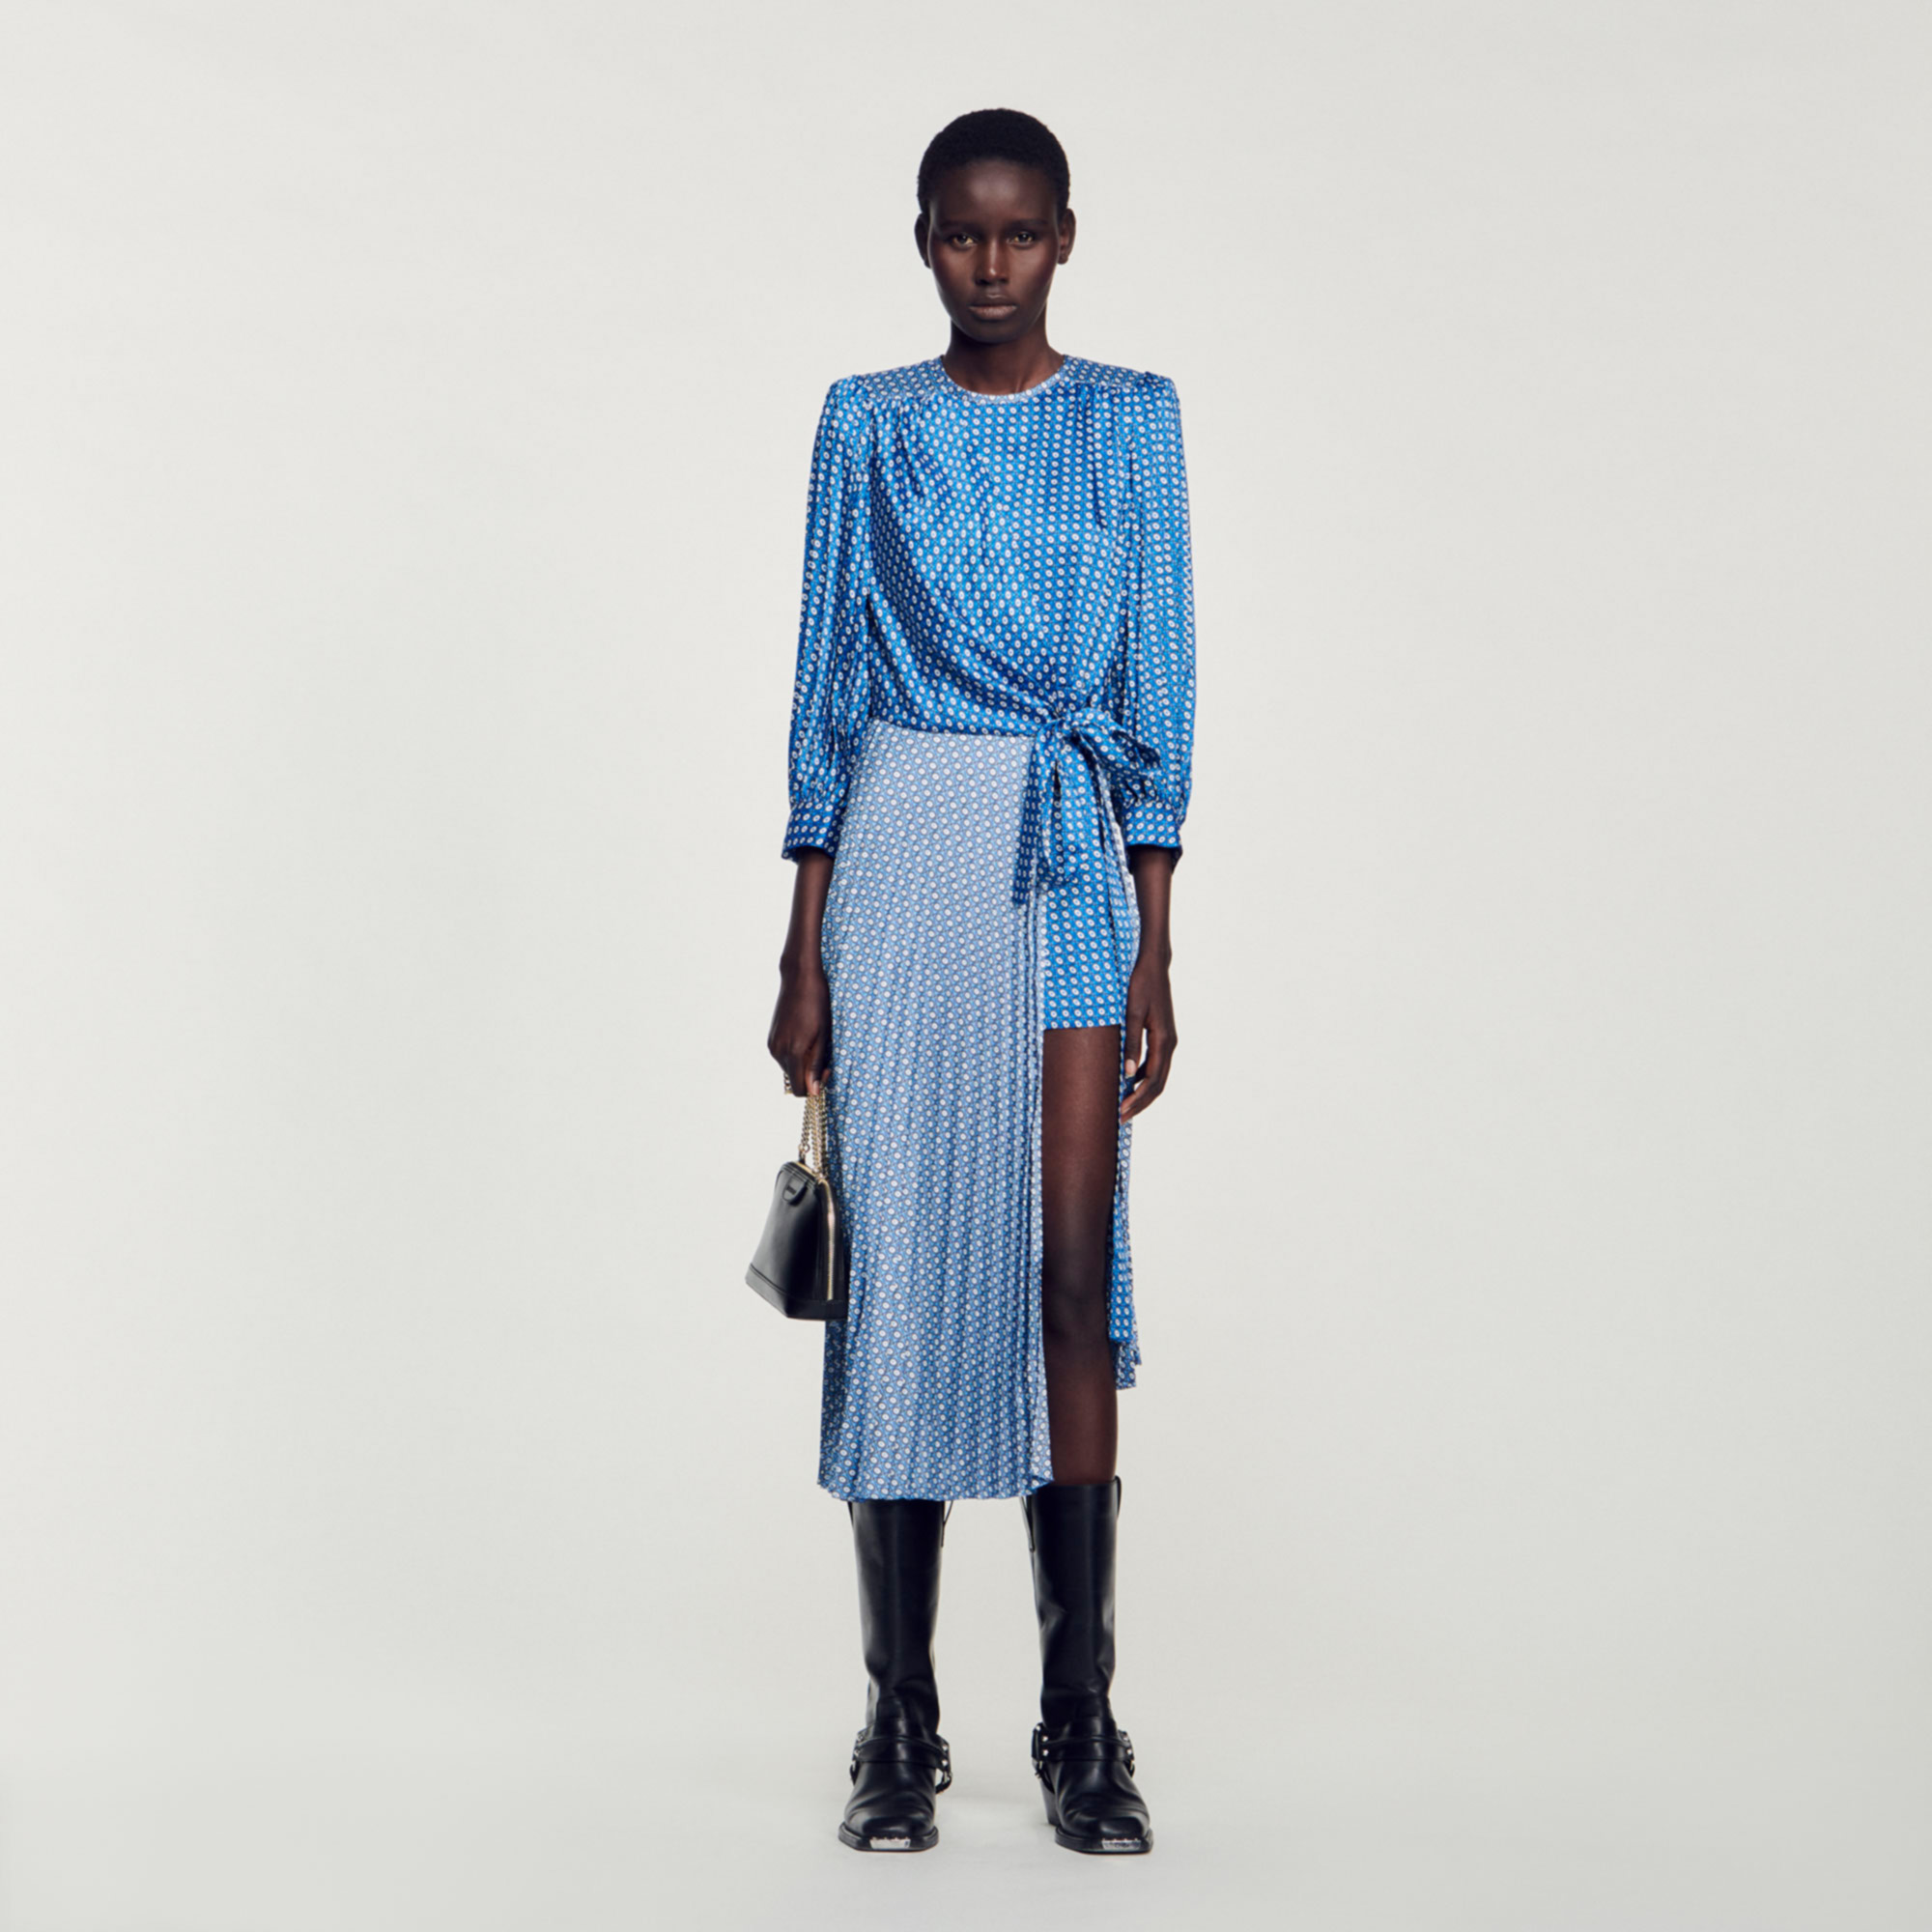 Sandro polyester Buttons: Long pleated satin wrap dress with a tie fastening at the side, long sleeves with gathered cuffs, underskirt shorts, and an all-over tie print